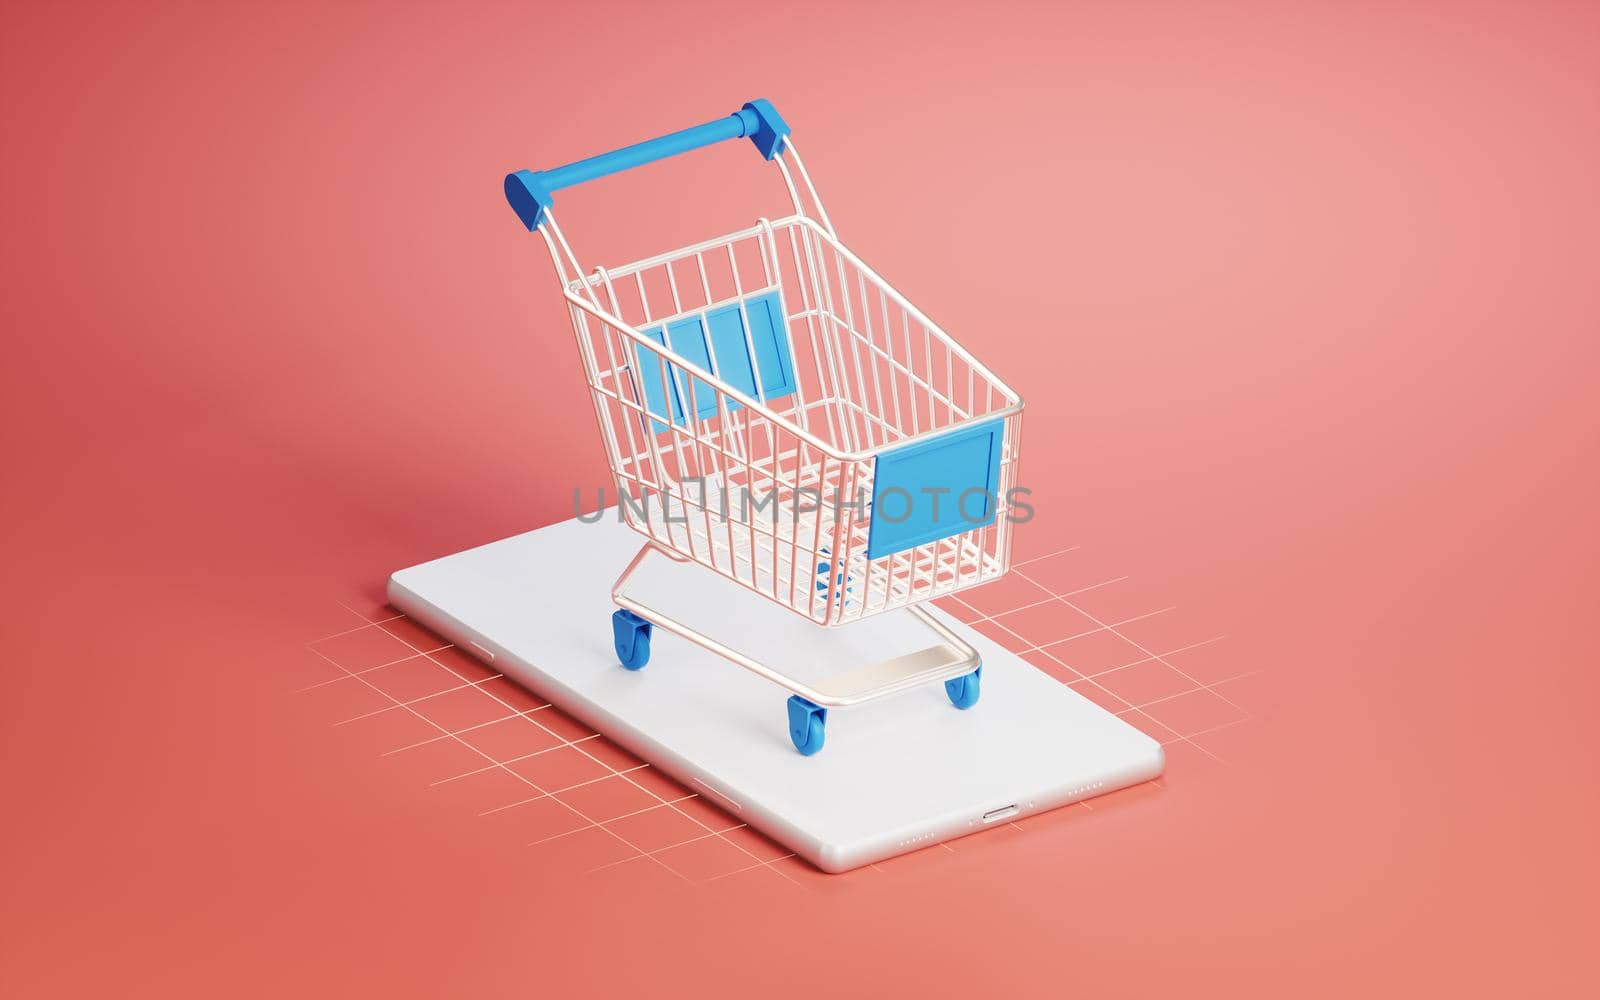 Shopping cart on the mobile phone, 3d rendering. Computer digital drawing.